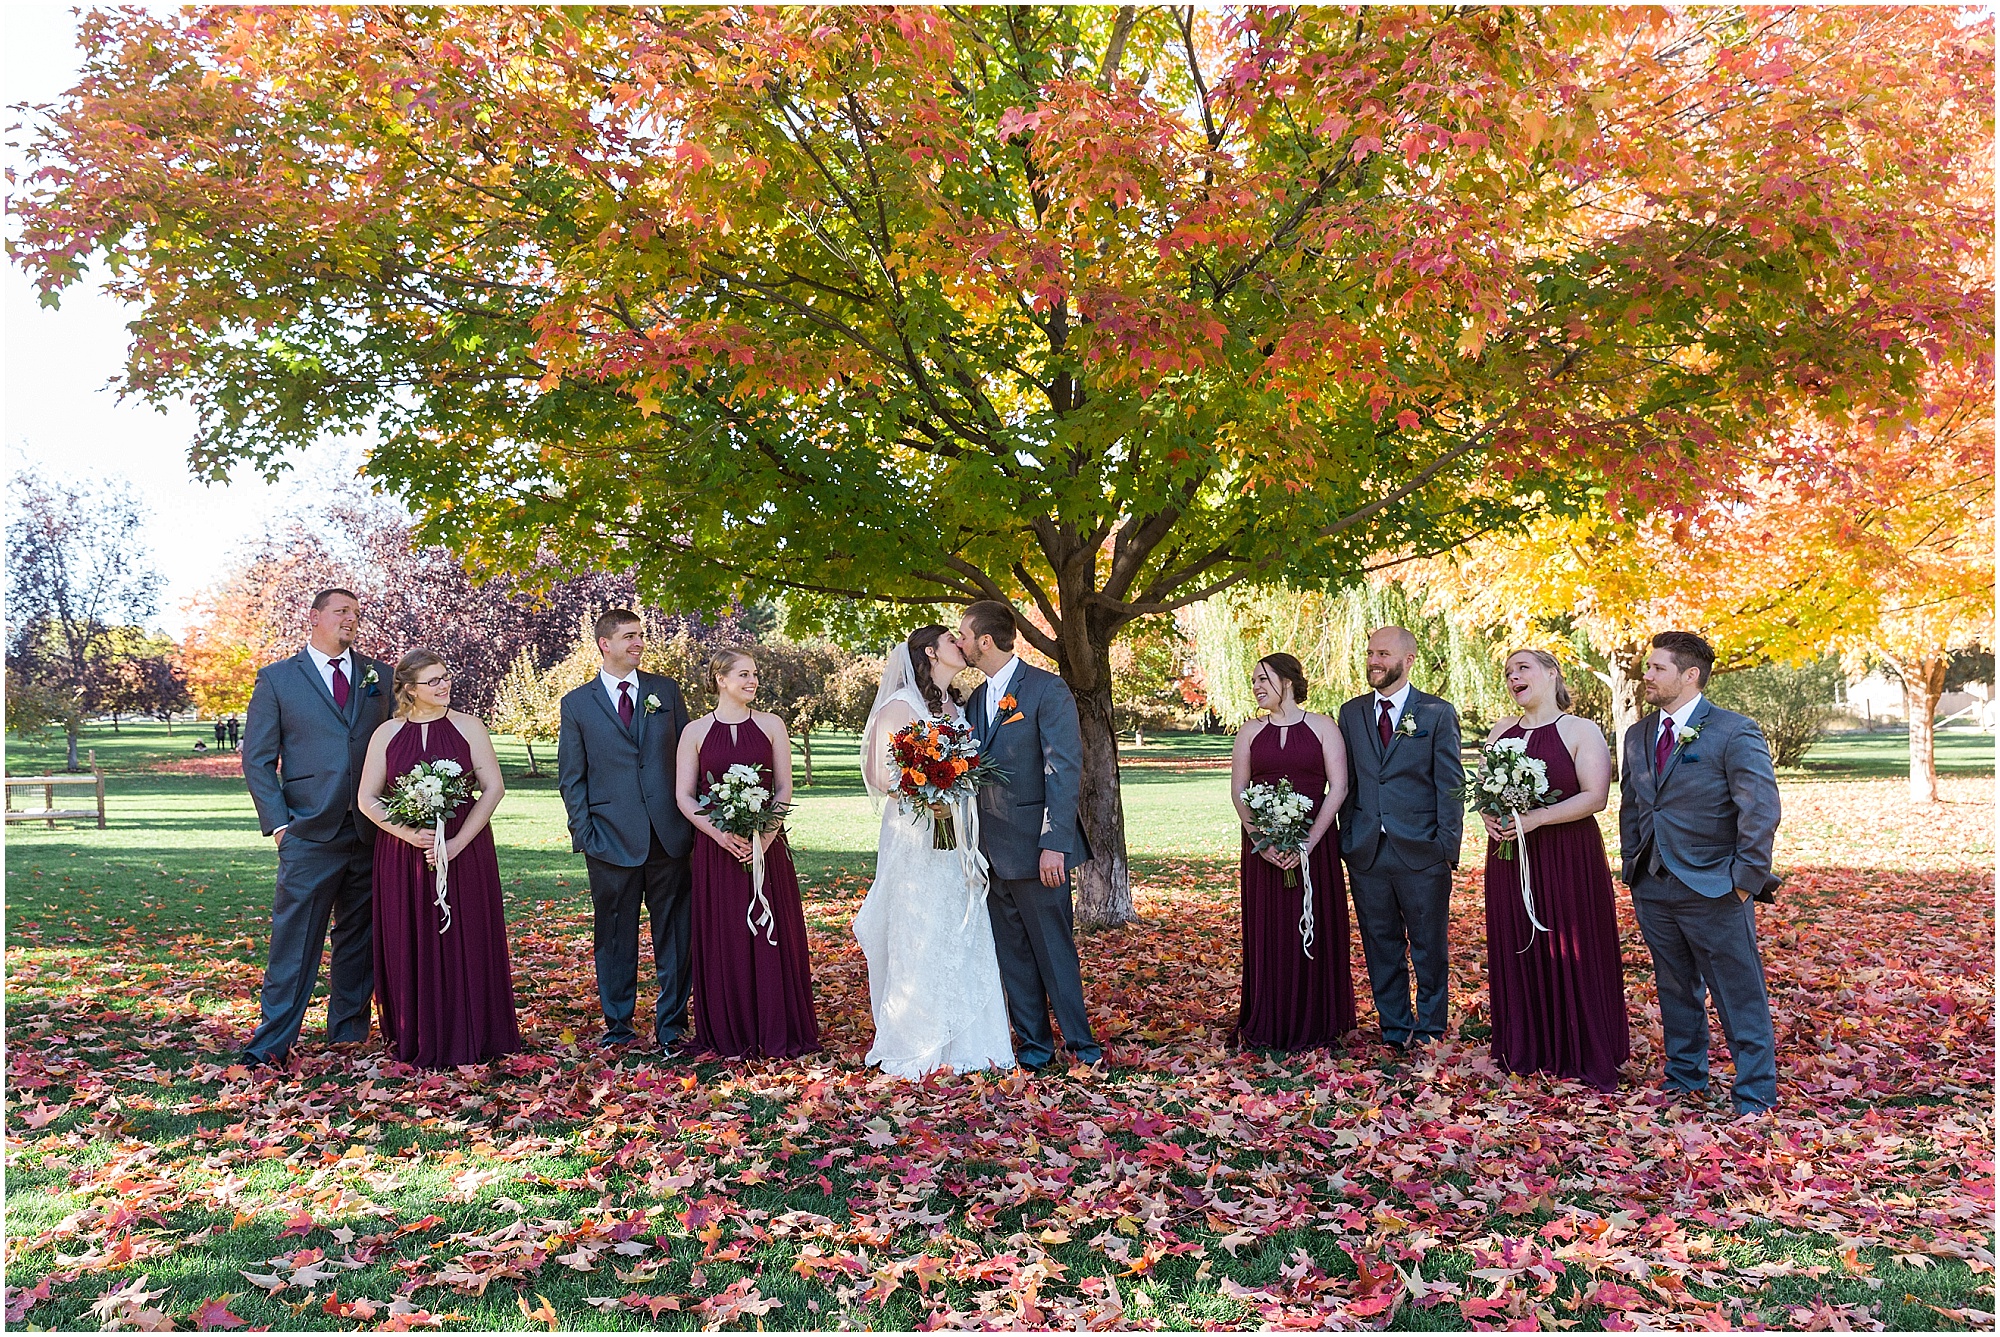 The wedding party poses under the gorgeous maple trees changing color at this Hollinshead Barn fall wedding in Bend, OR. | Erica Swantek Photography